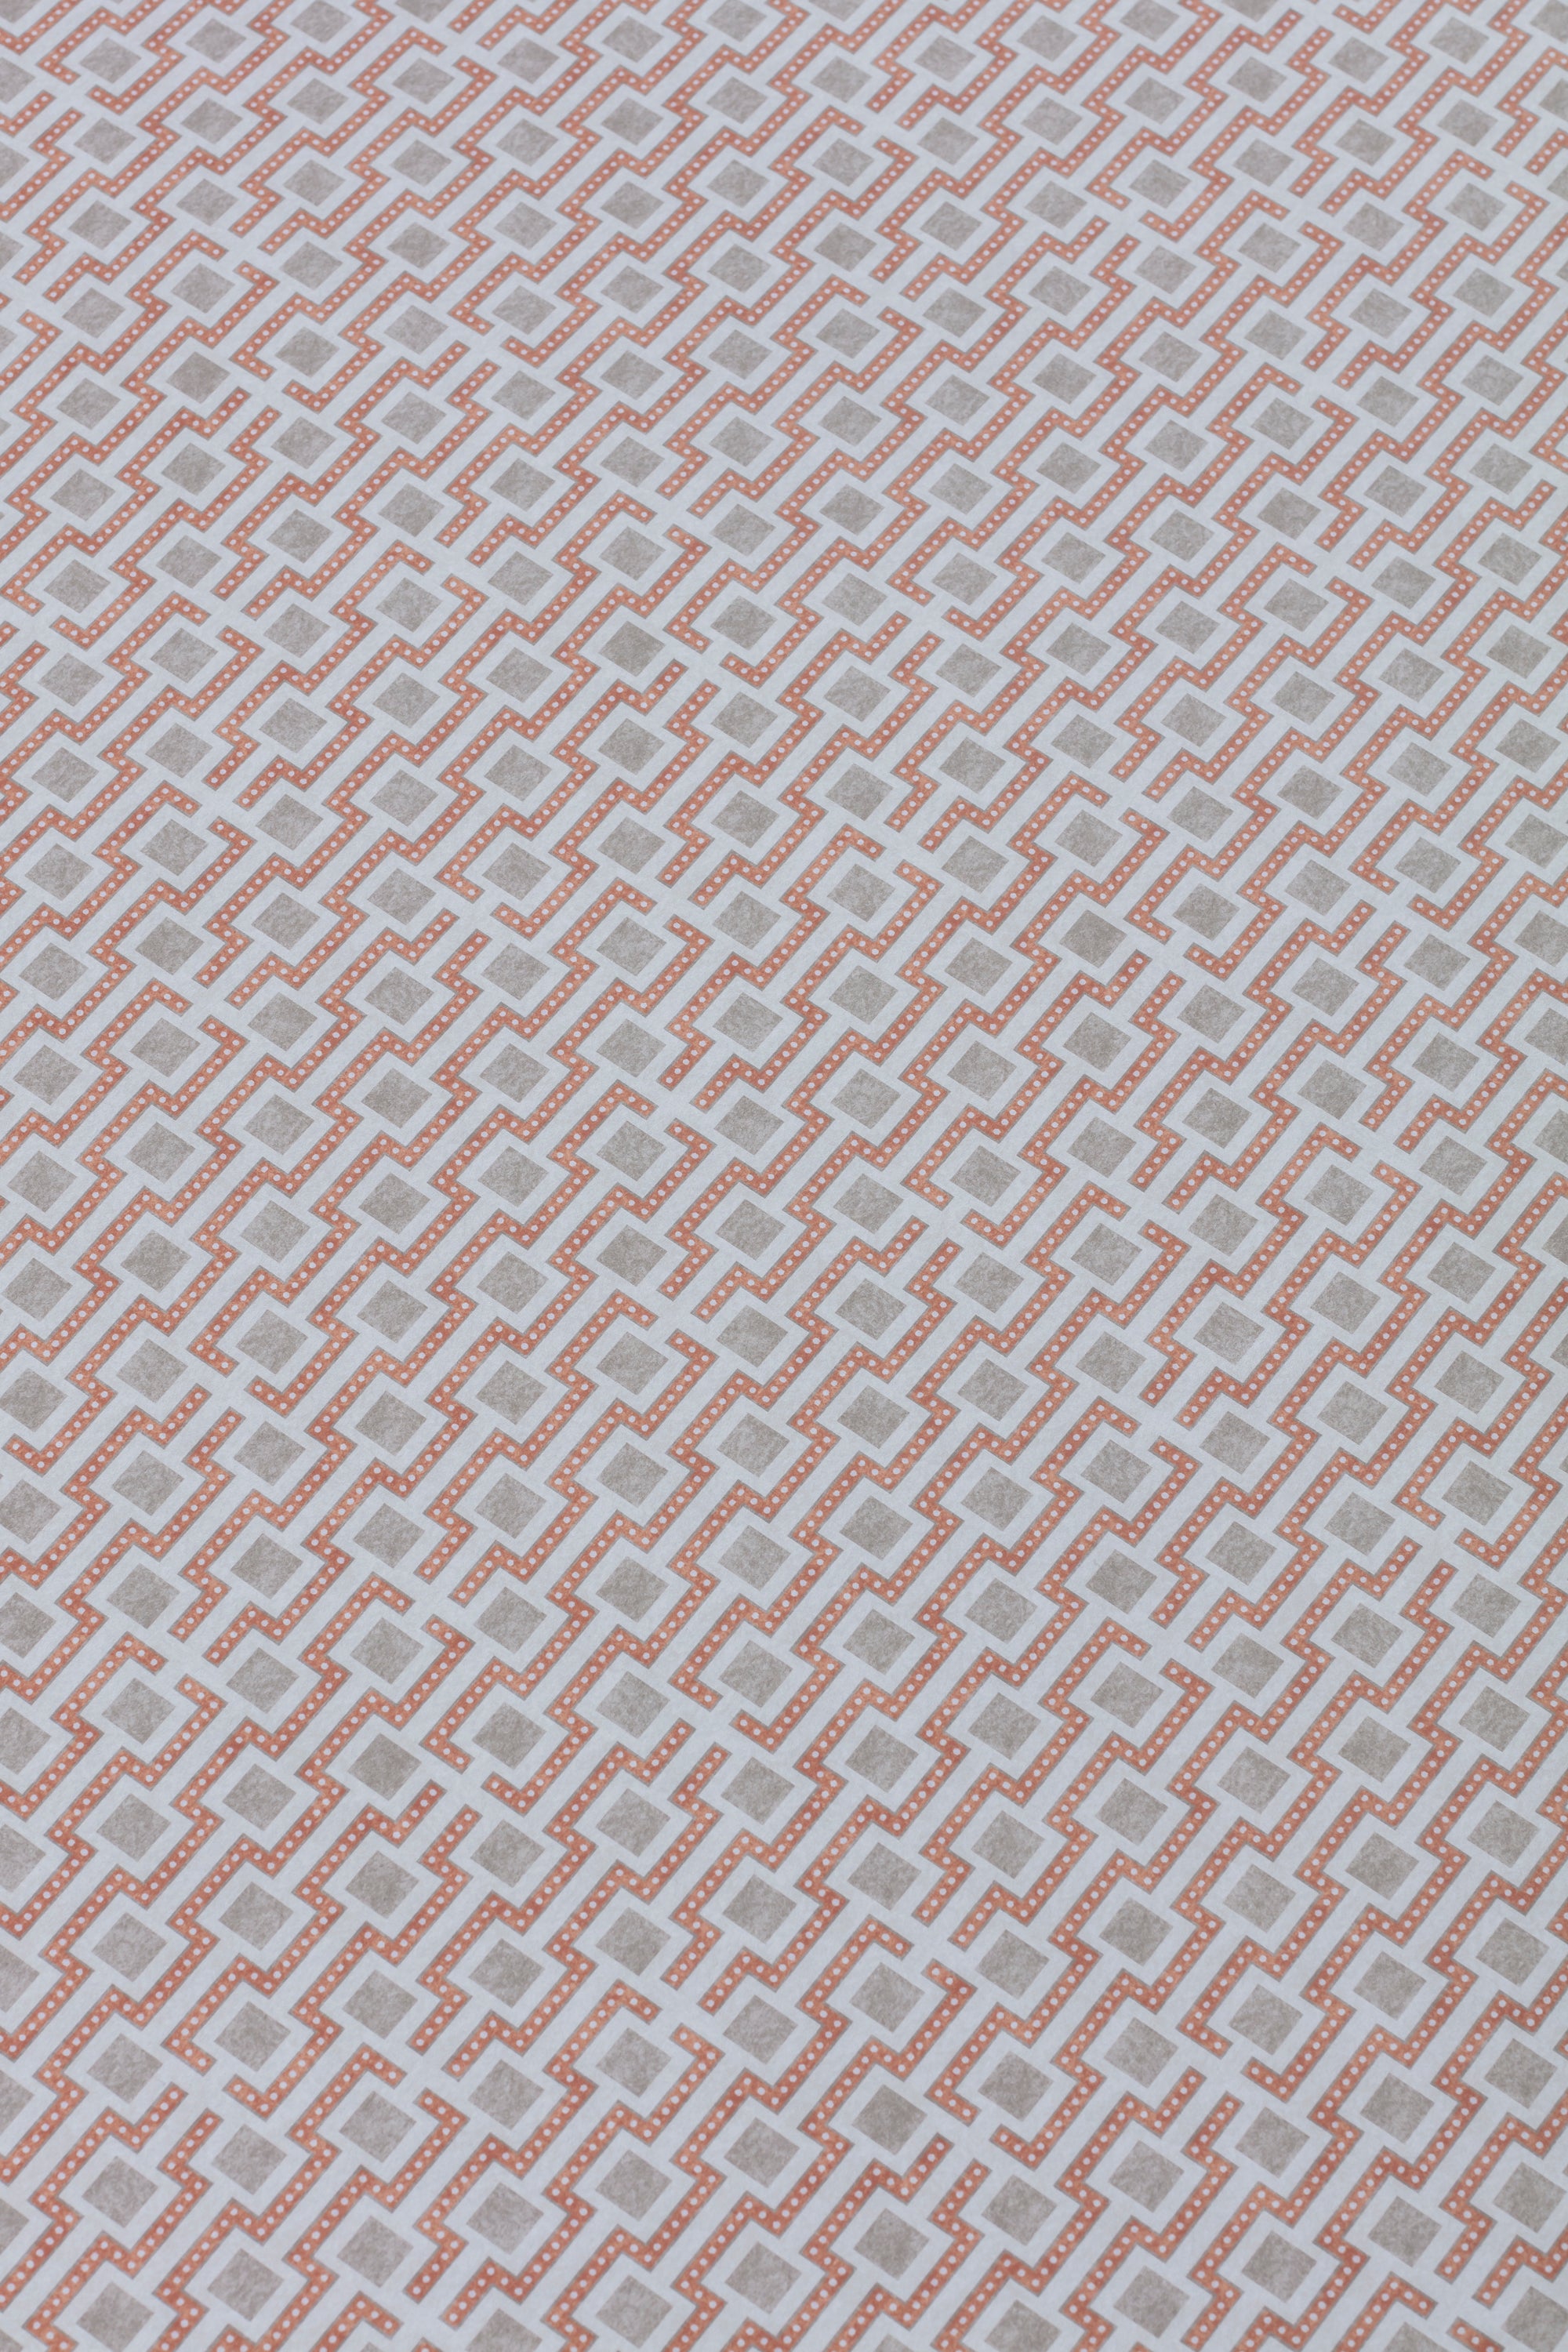 Detail of a wallpaper panel in a geometric grid print in shades of pink and gray.